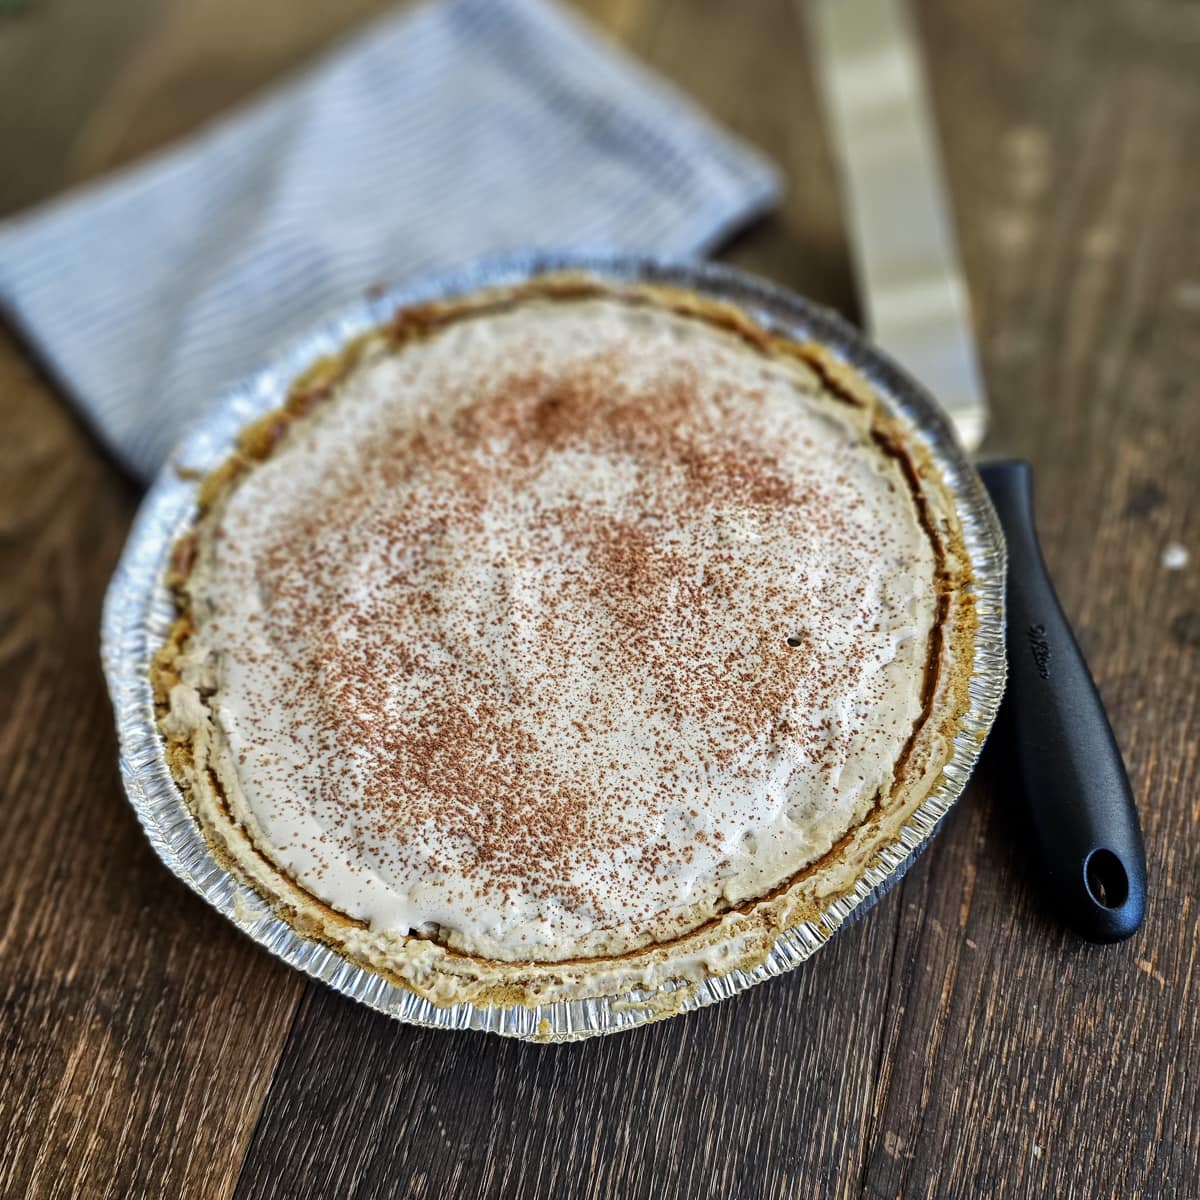 British banoffee pie dusted with cocoa powder.